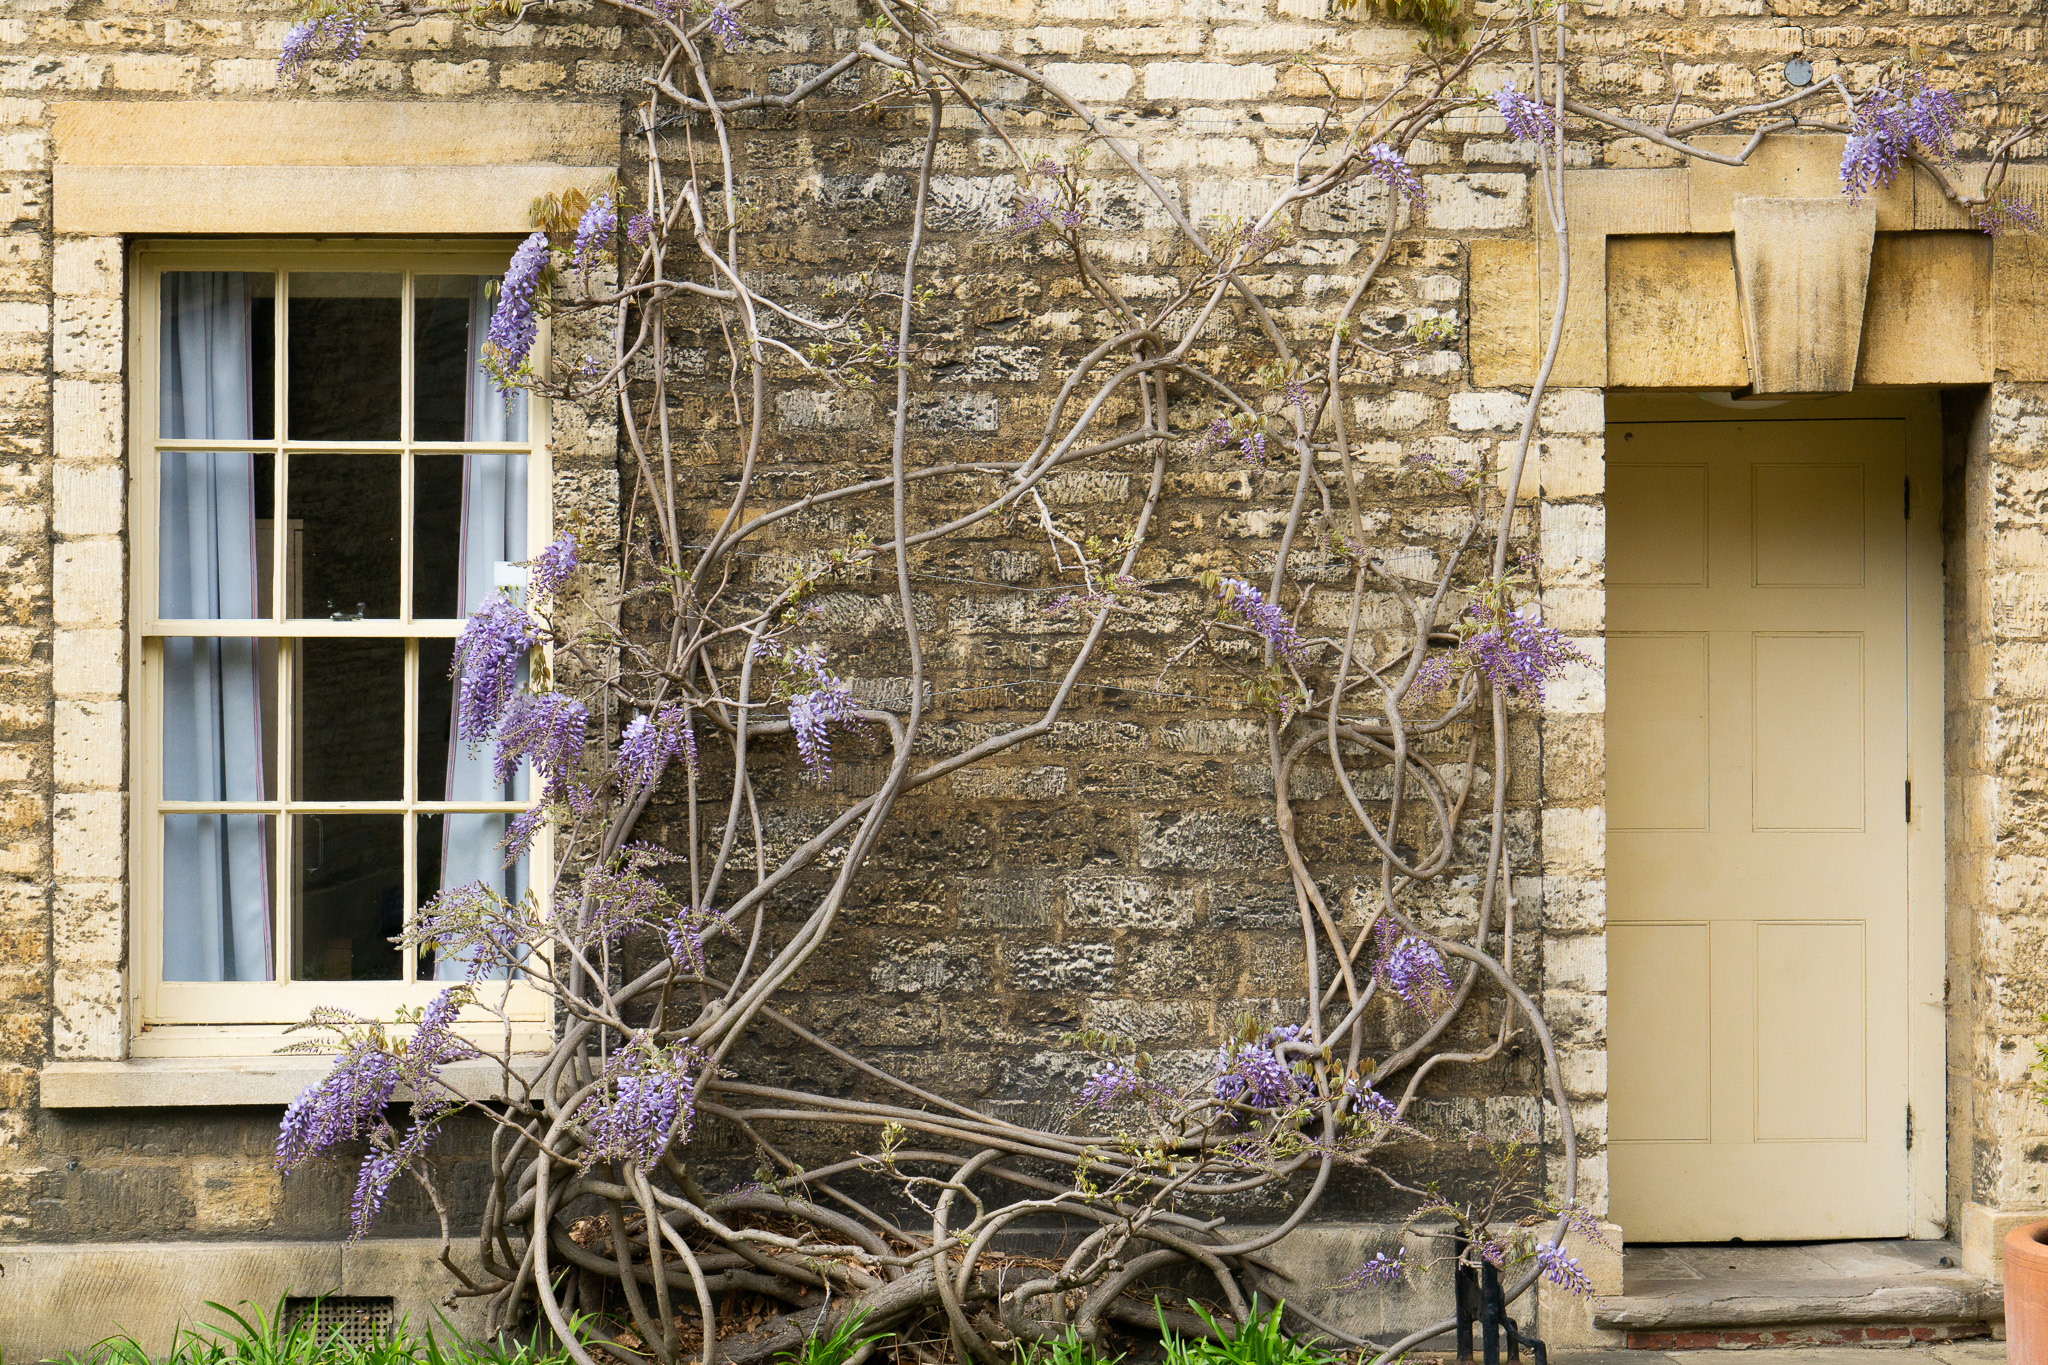 The Wisteria in Darbishire has begun to flower this month